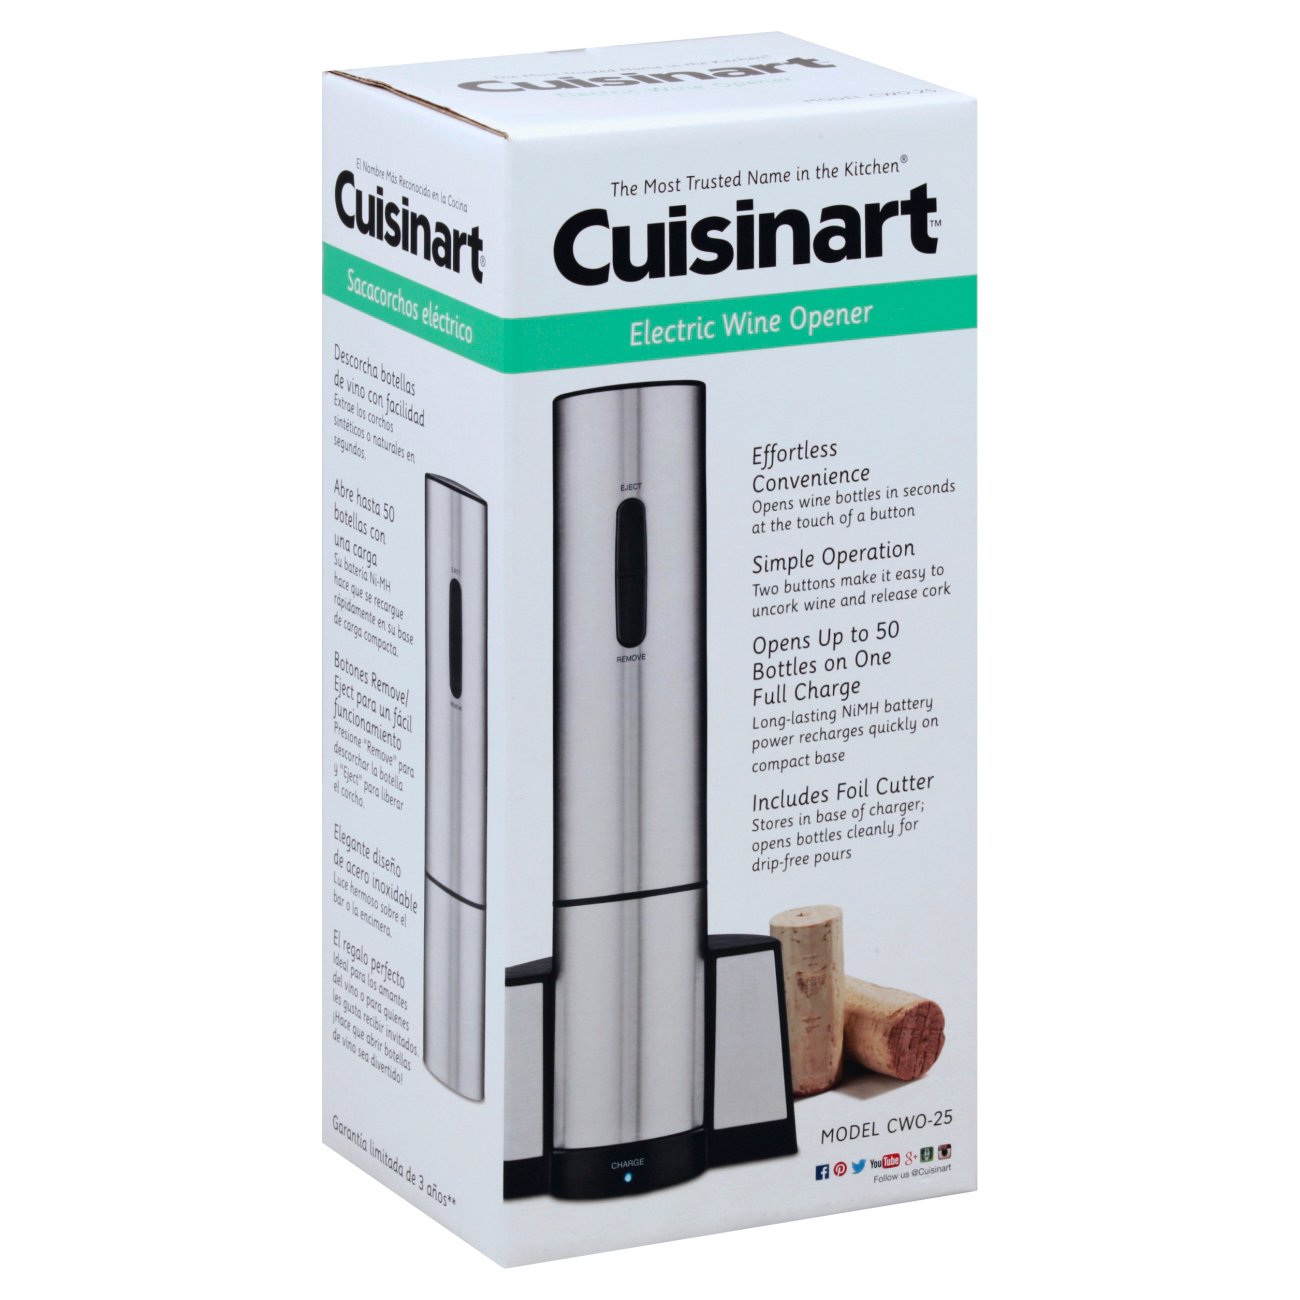 Stainless Steel Cuisinart CWO-25 Electric Wine Opener 